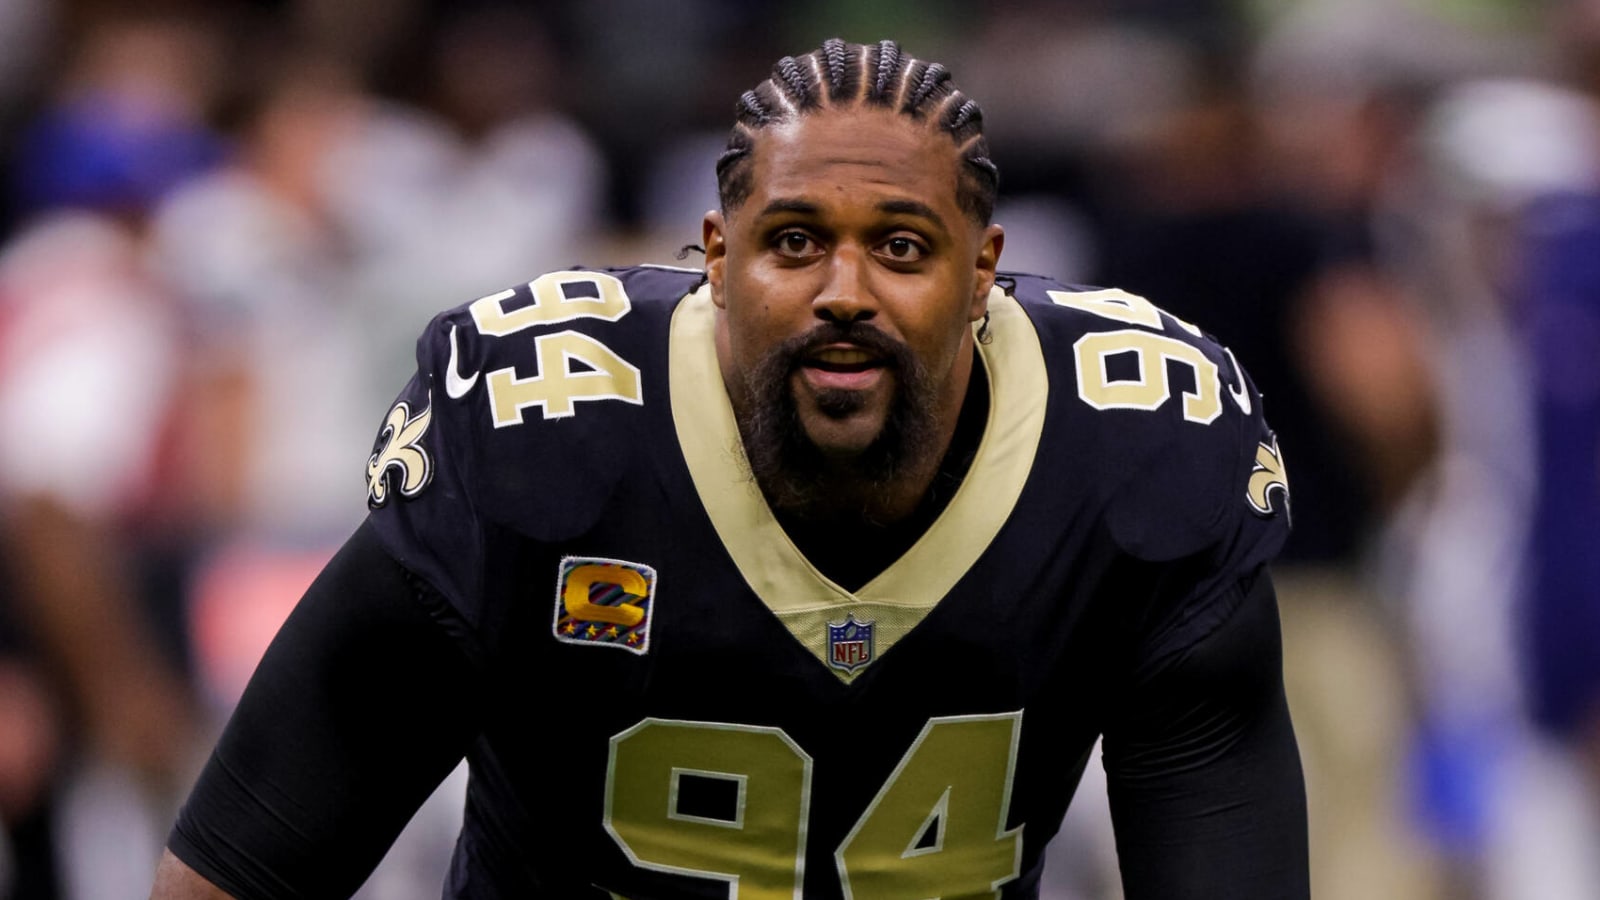 Saints DE gives simple explanation for whether he'll retire